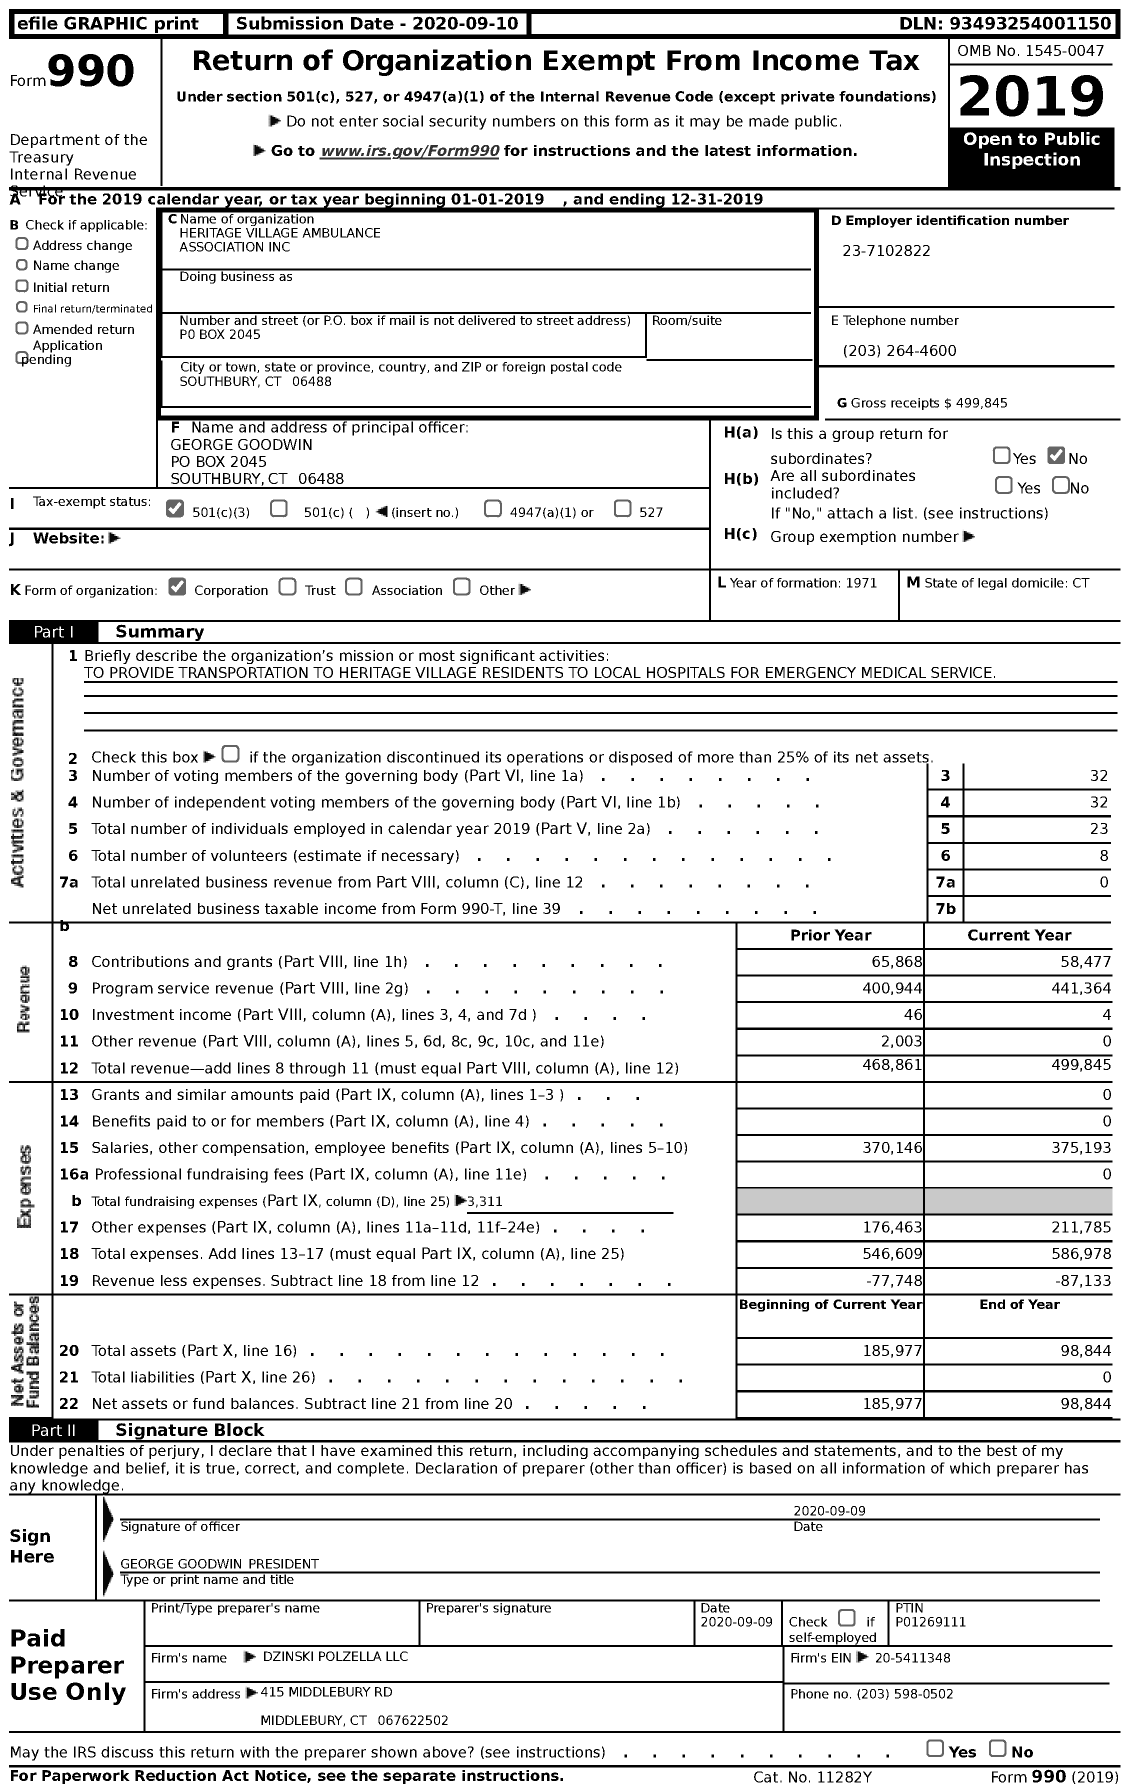 Image of first page of 2019 Form 990 for Heritage Village Ambulance Association